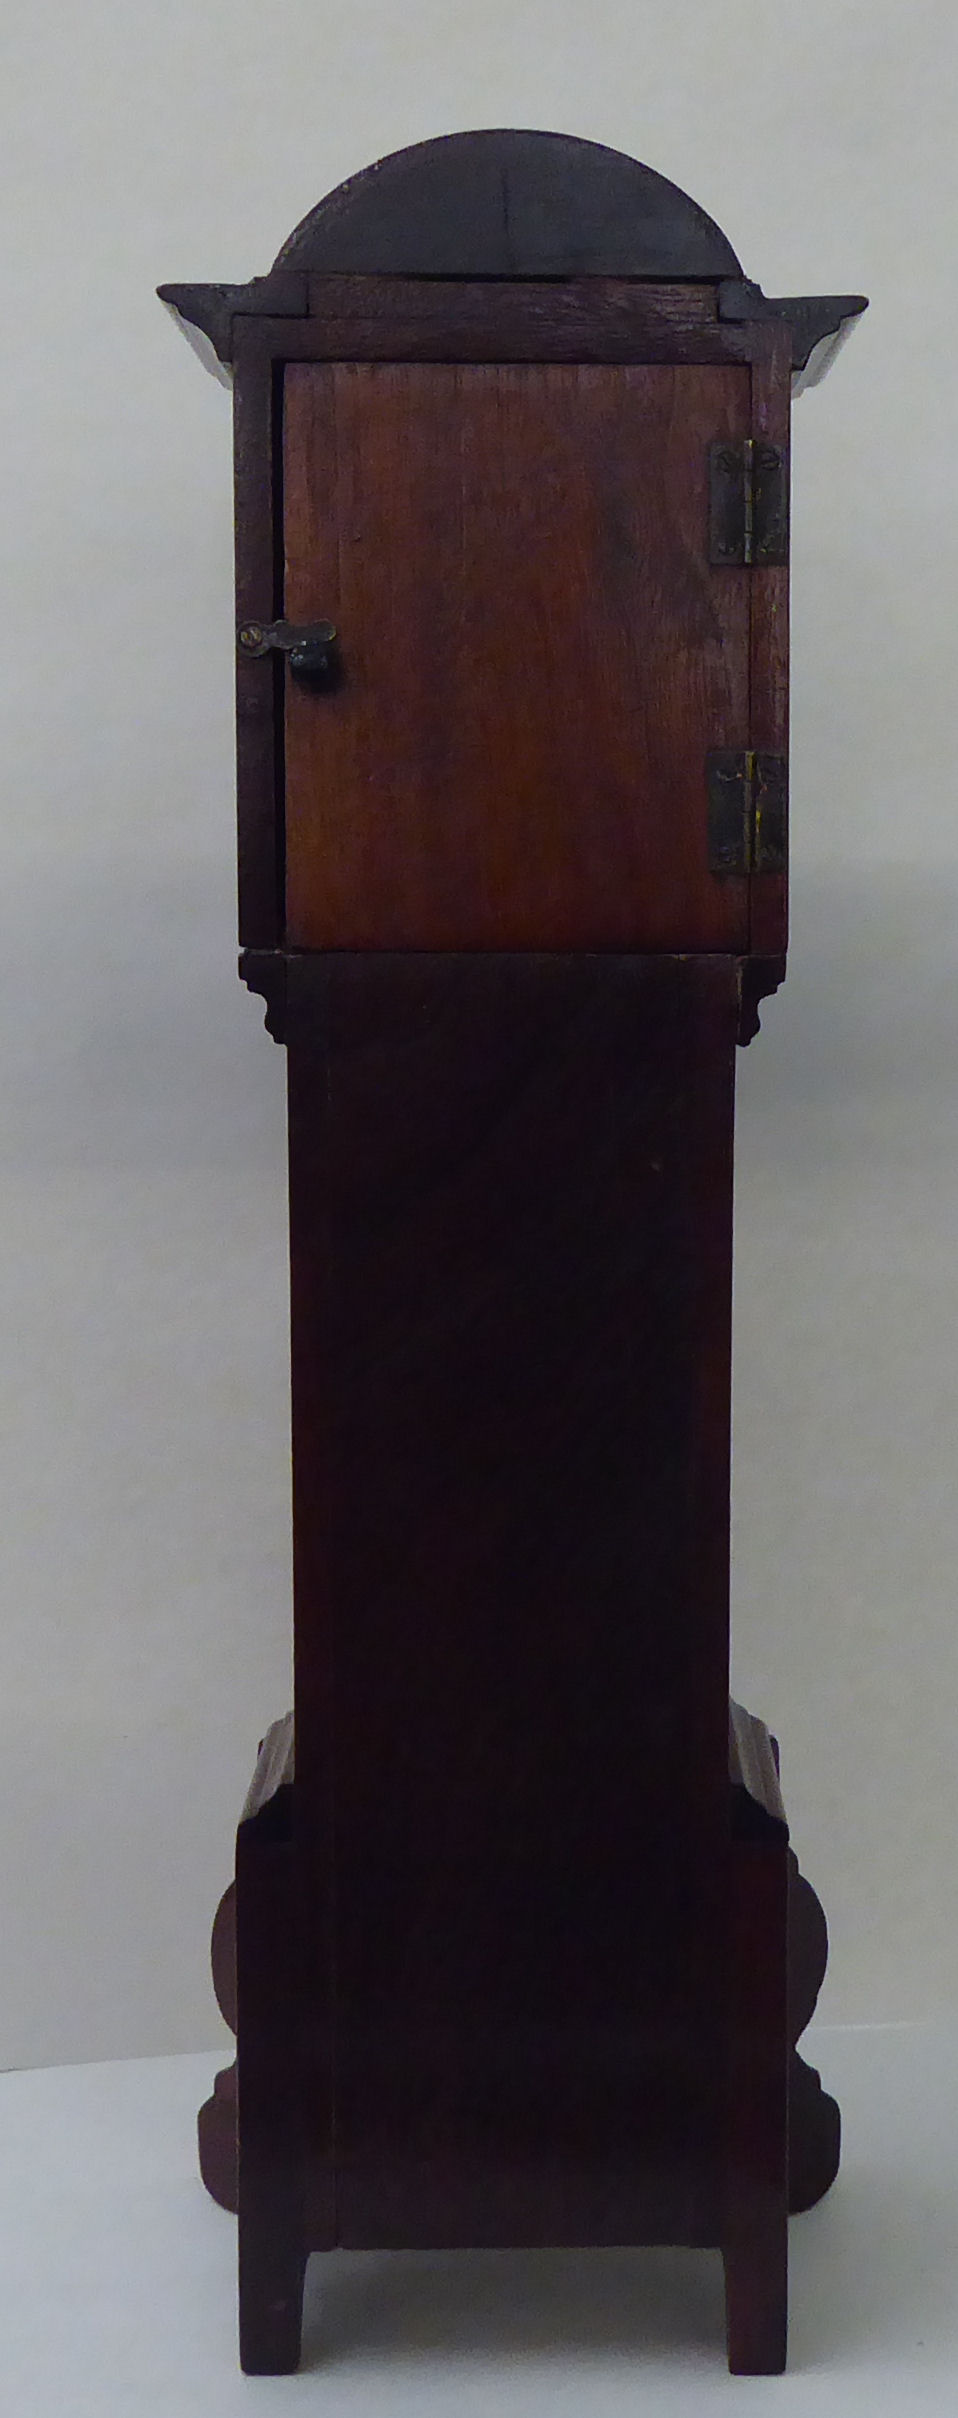 An early 20thC mahogany mantel timepiece, fashioned as a longcase clock with an arched hood and - Image 3 of 4